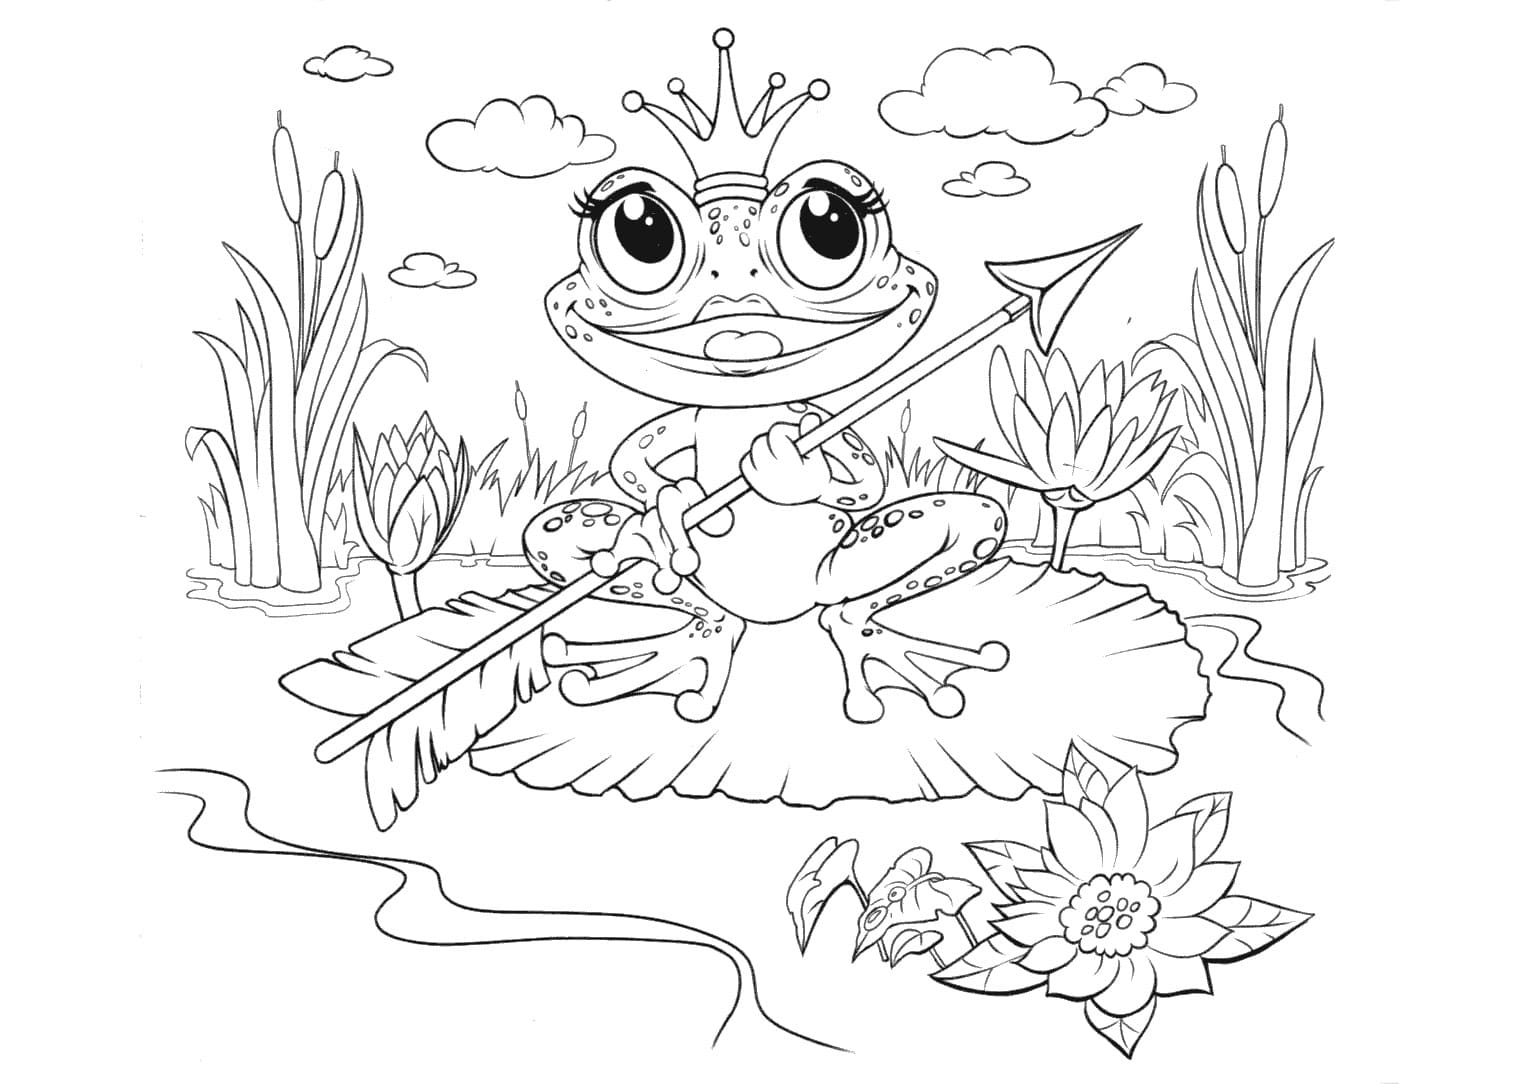 Princess frog in the swamp